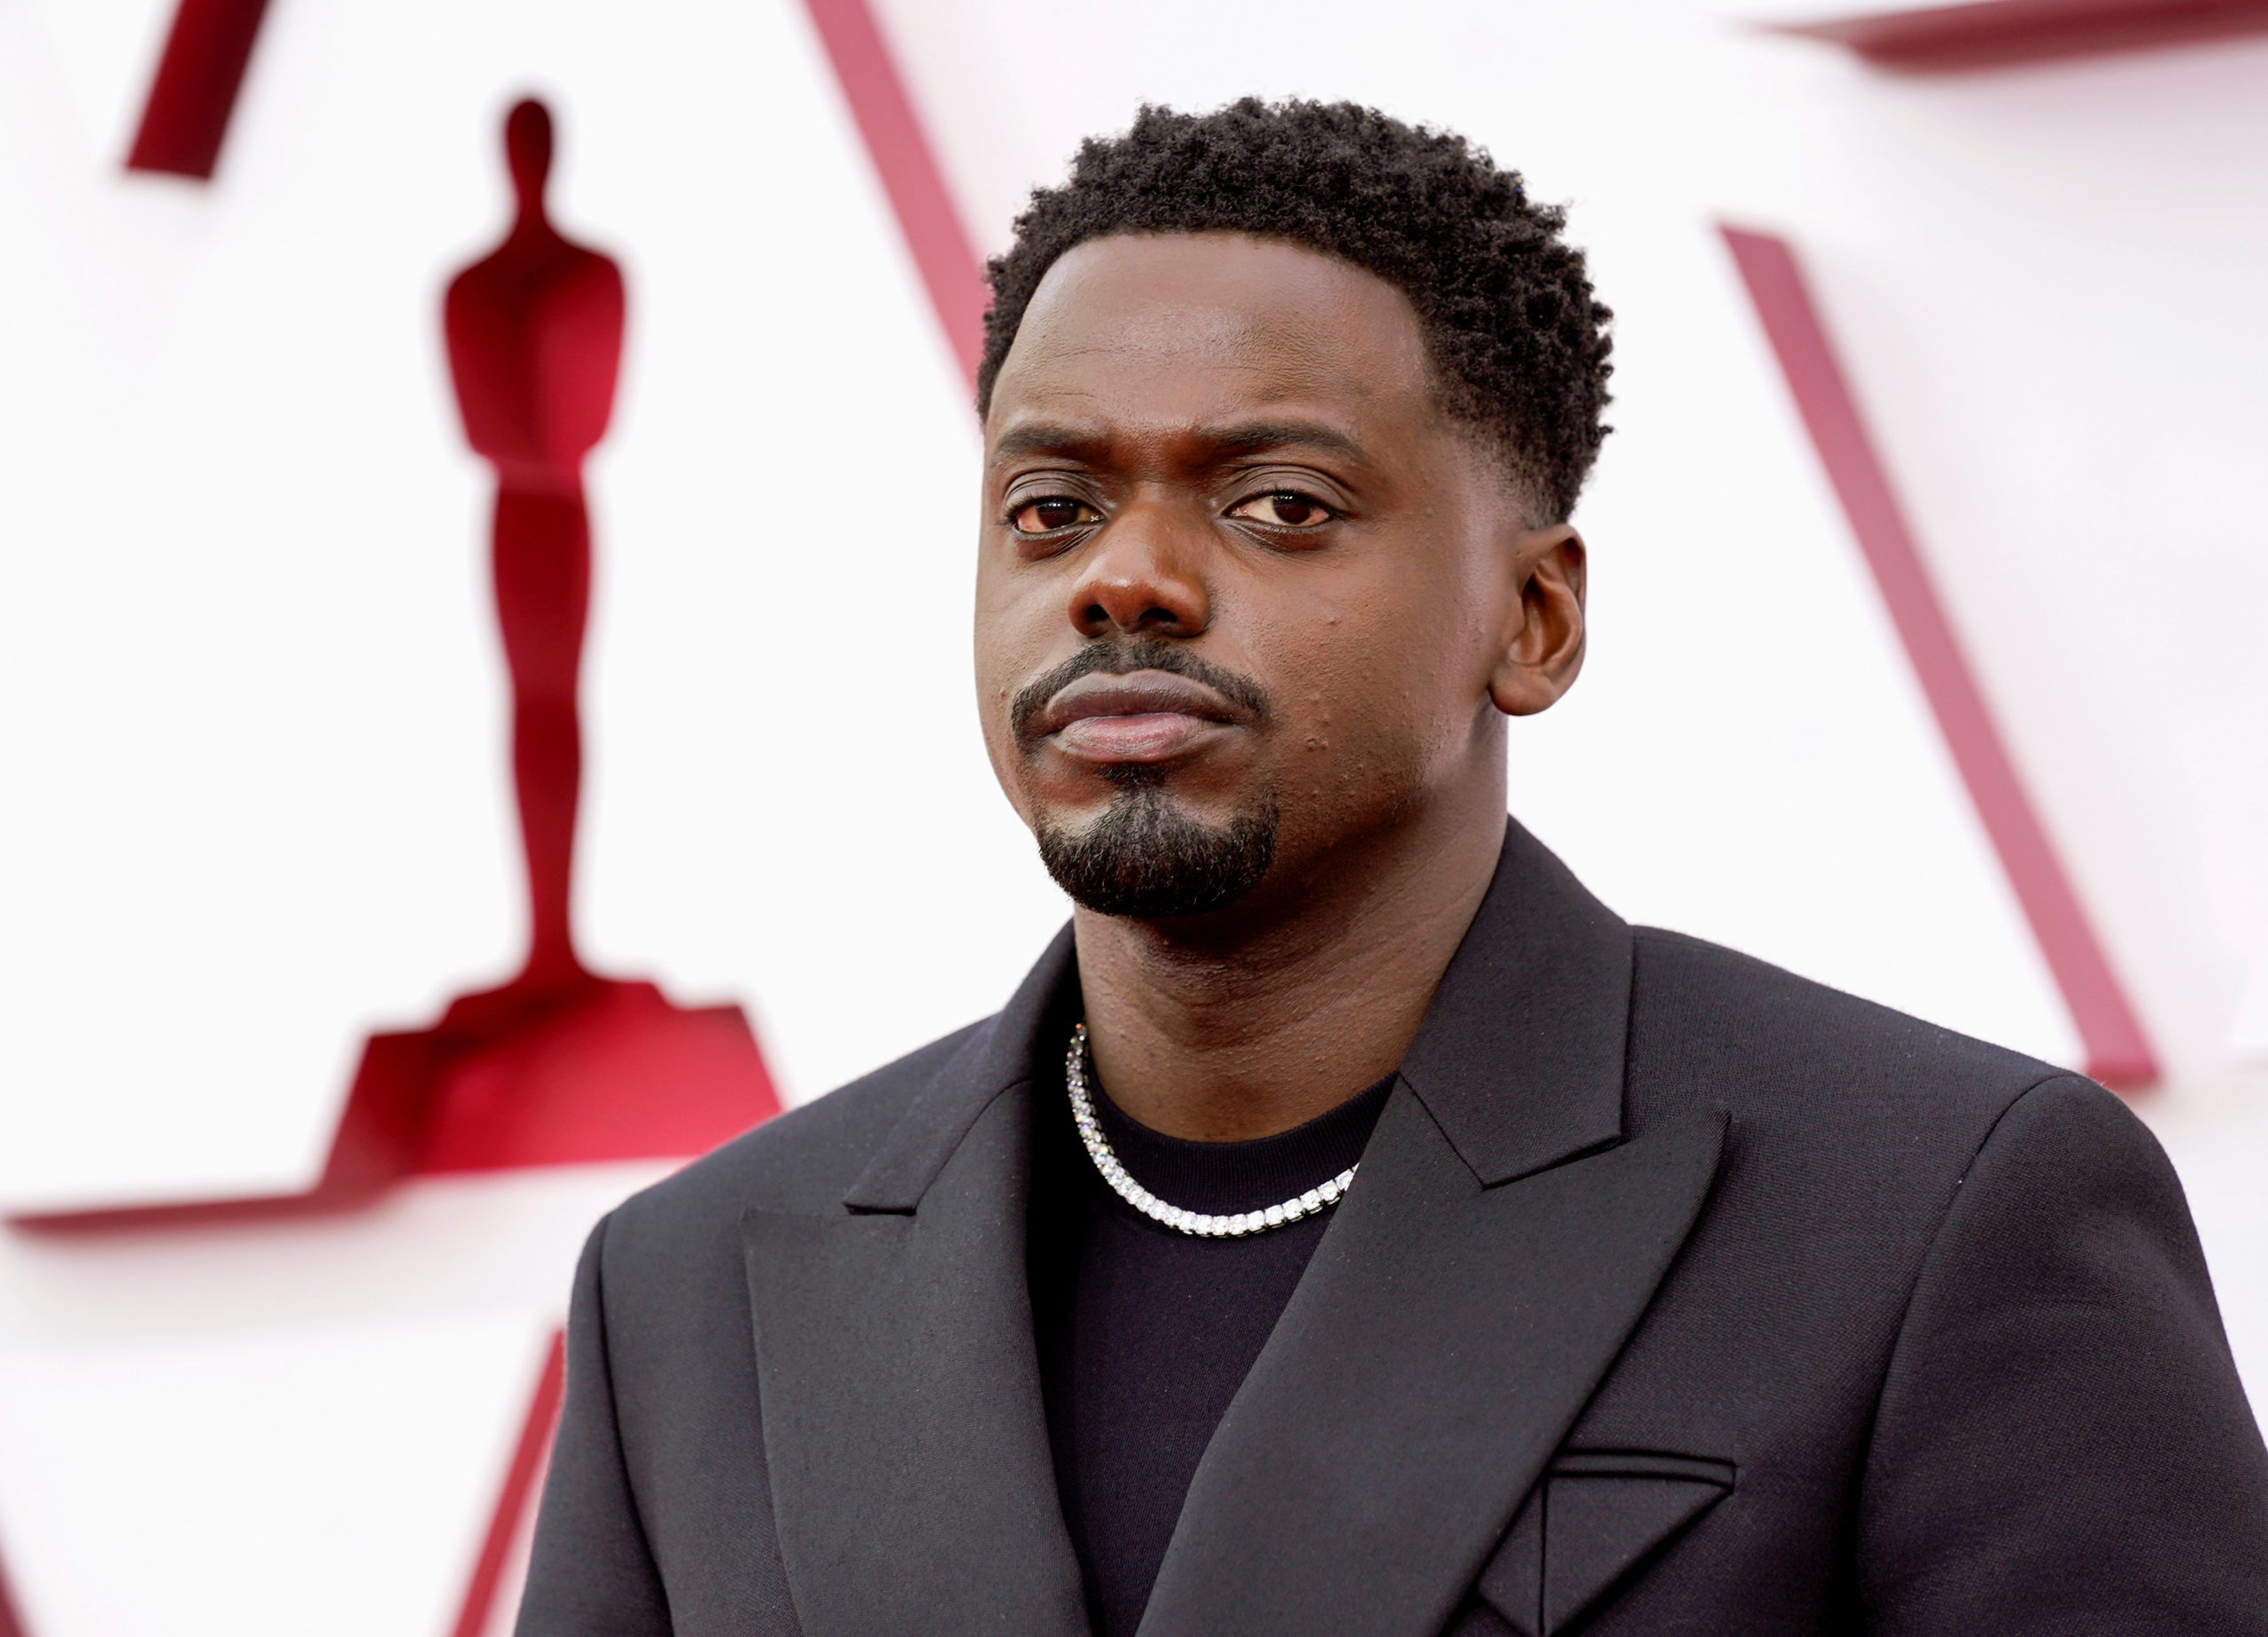 Daniel Kaluuya arrives to the Oscars red carpet for the 93rd Academy Awards in Los Angeles, California, U.S., April 25, 2021. Chris Pizzello/Pool via REUTERS